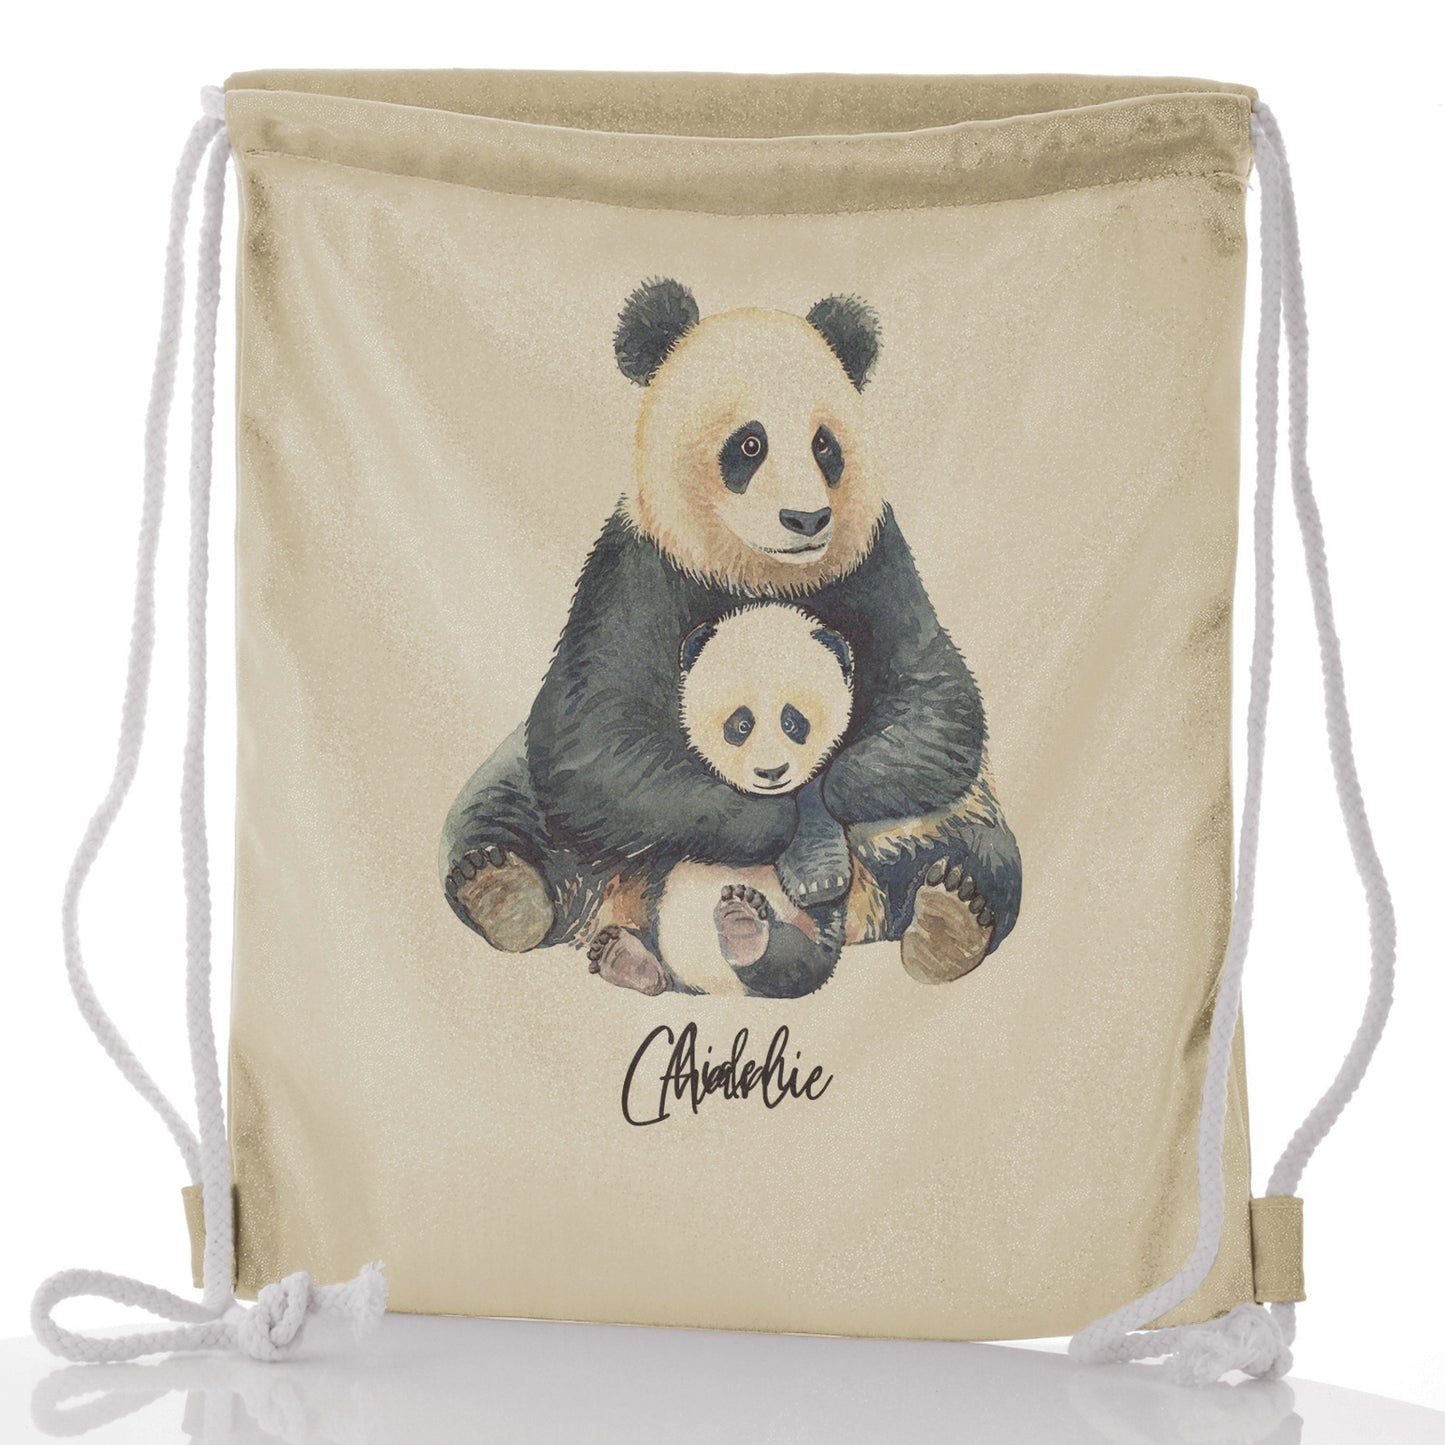 Personalised Glitter Drawstring Backpack with Welcoming Text and Relaxing Mum and Baby Pandas